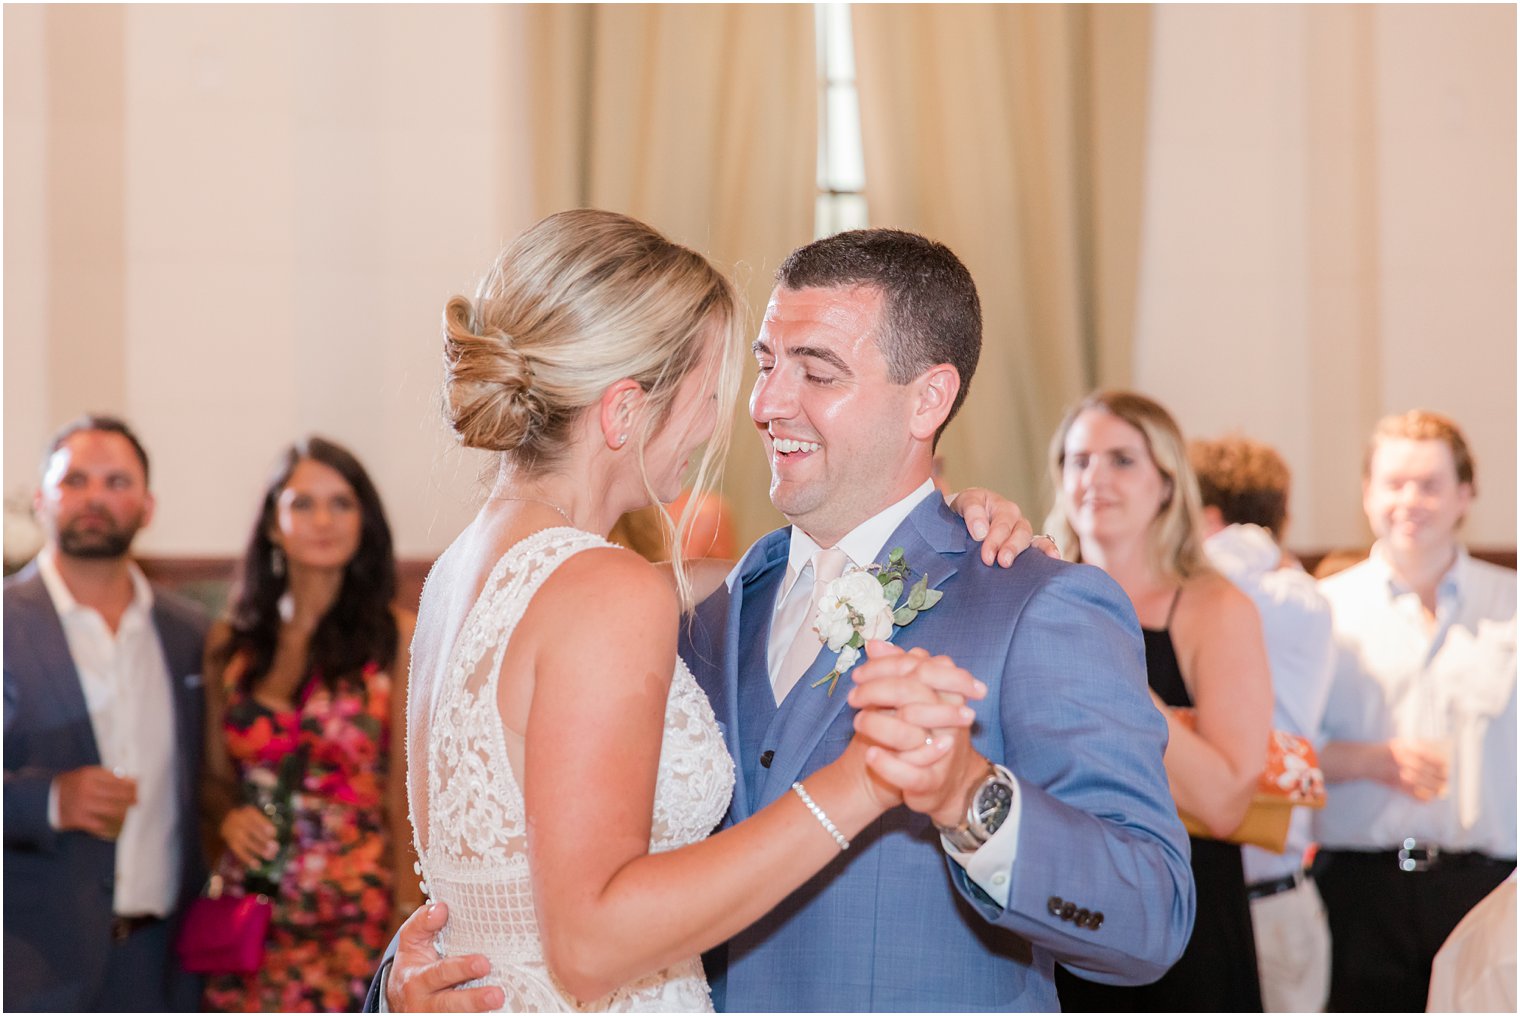 first dance at Sandy Hook Chapel wedding reception photographed by Idalia Photography